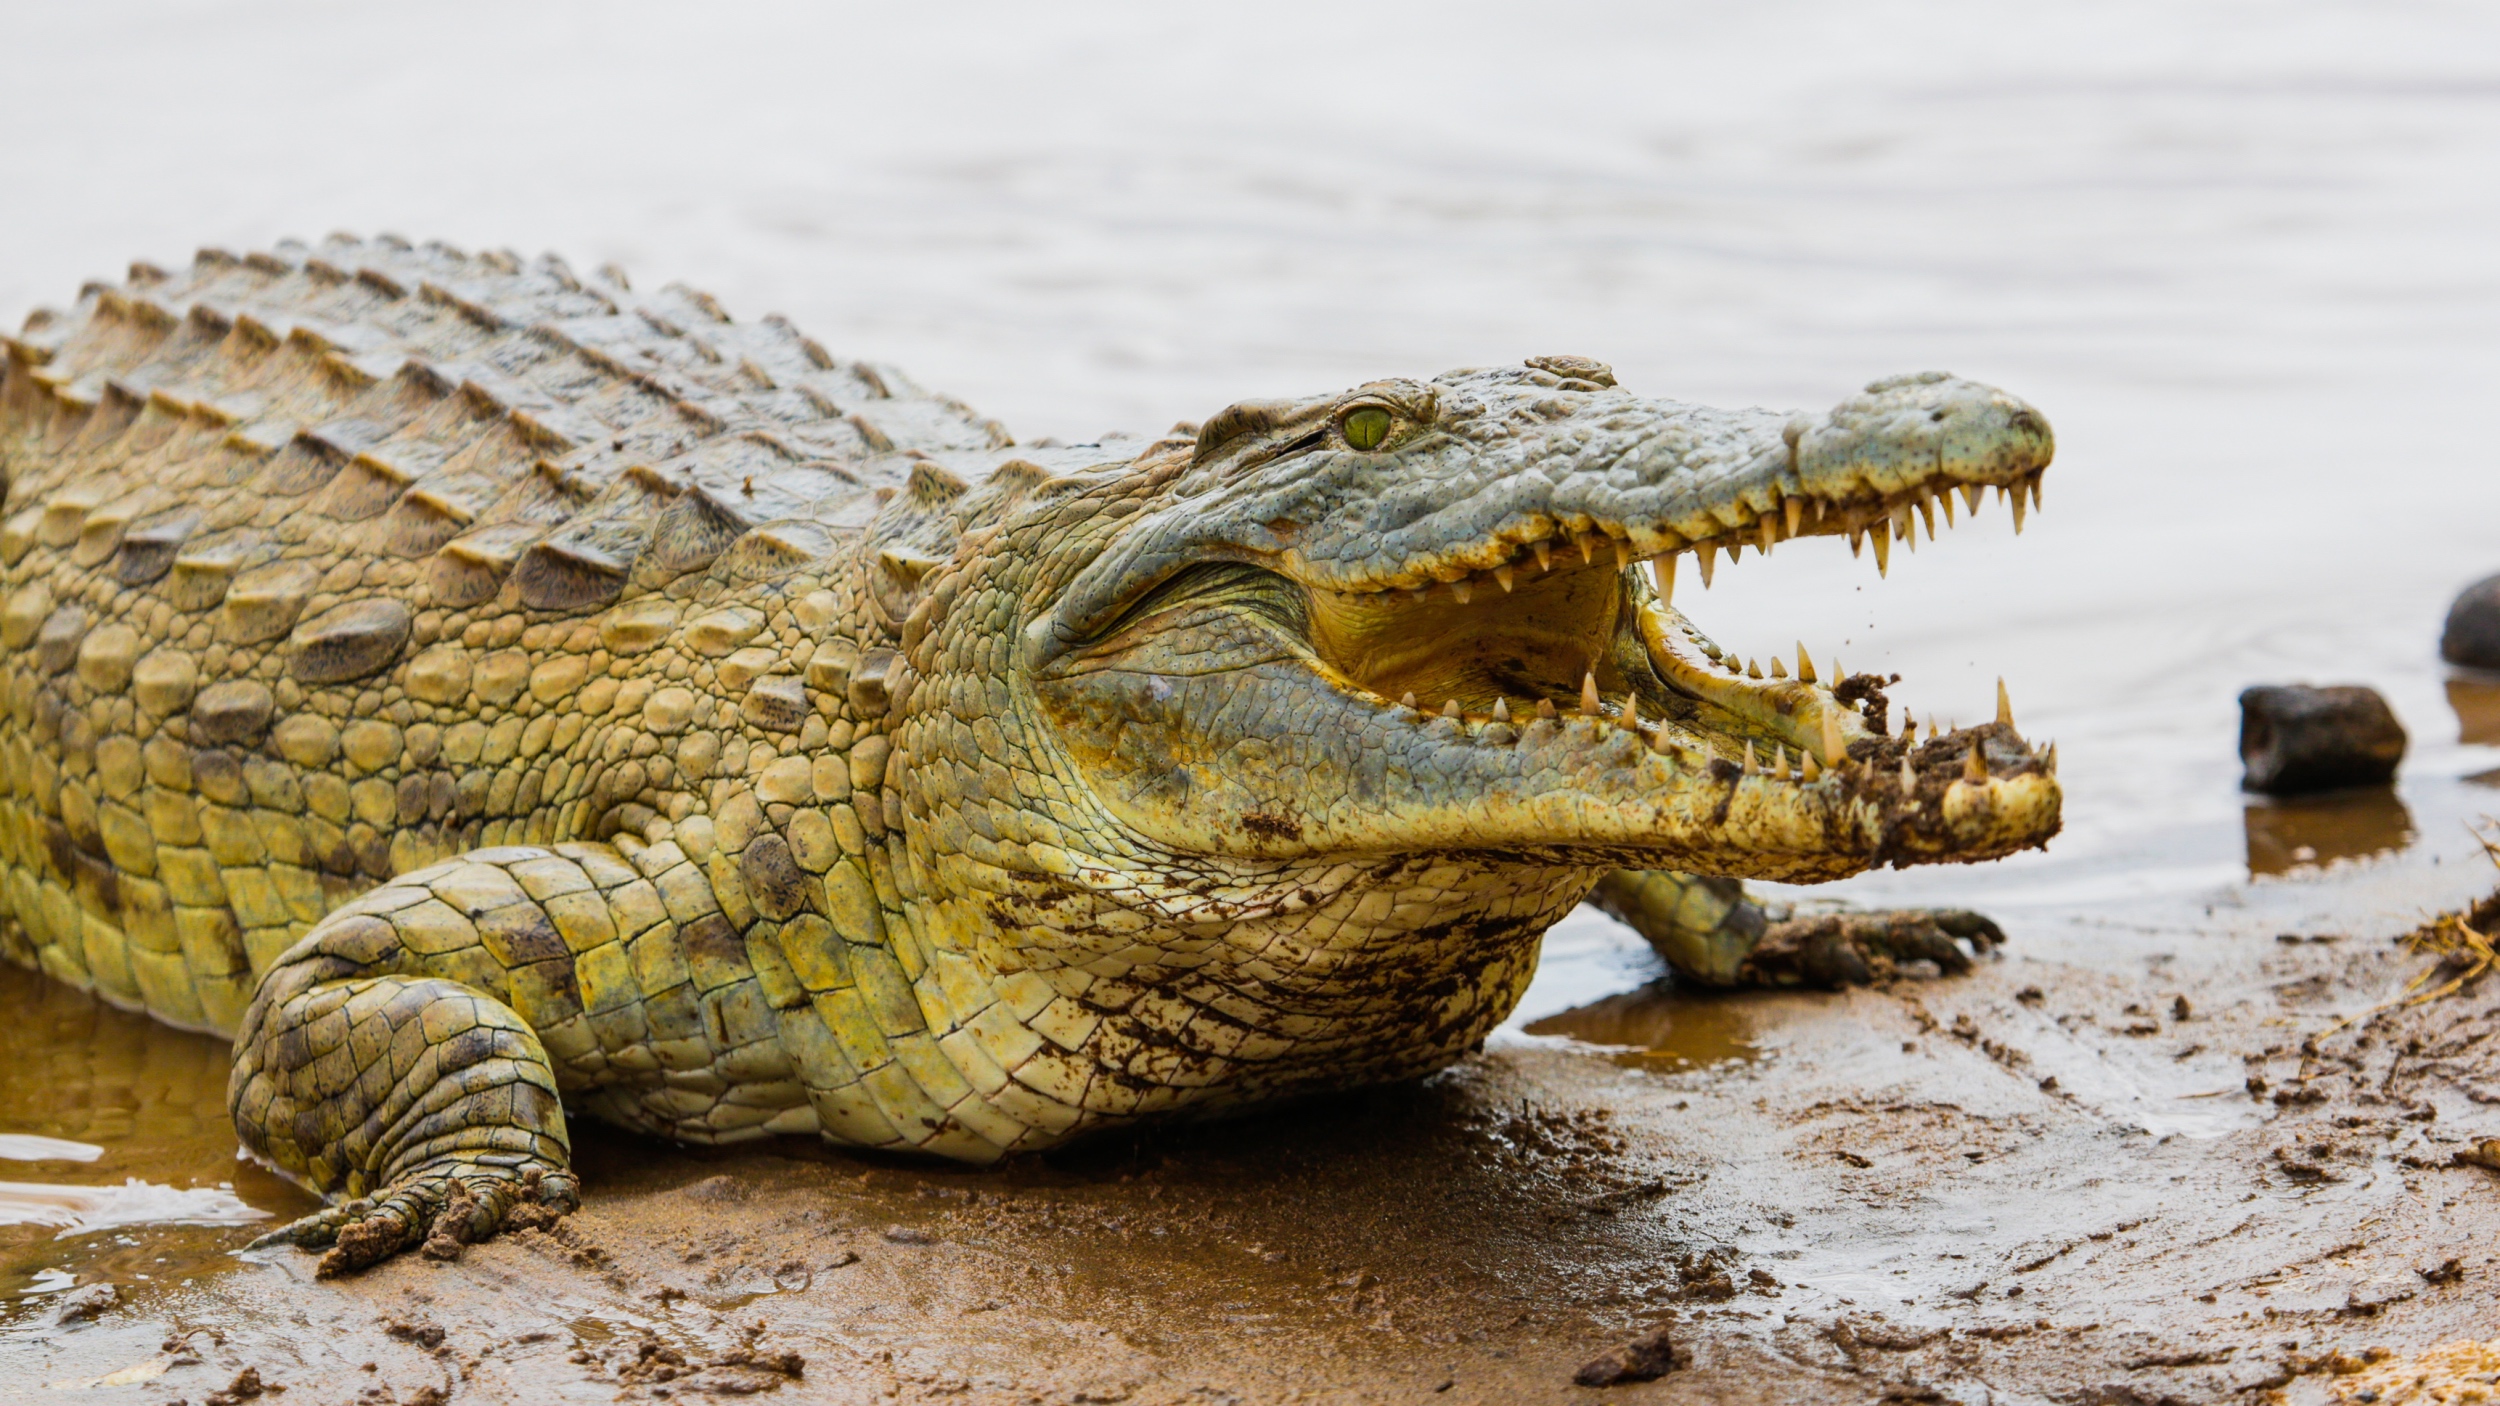 Cannibal crocodile in South Africa